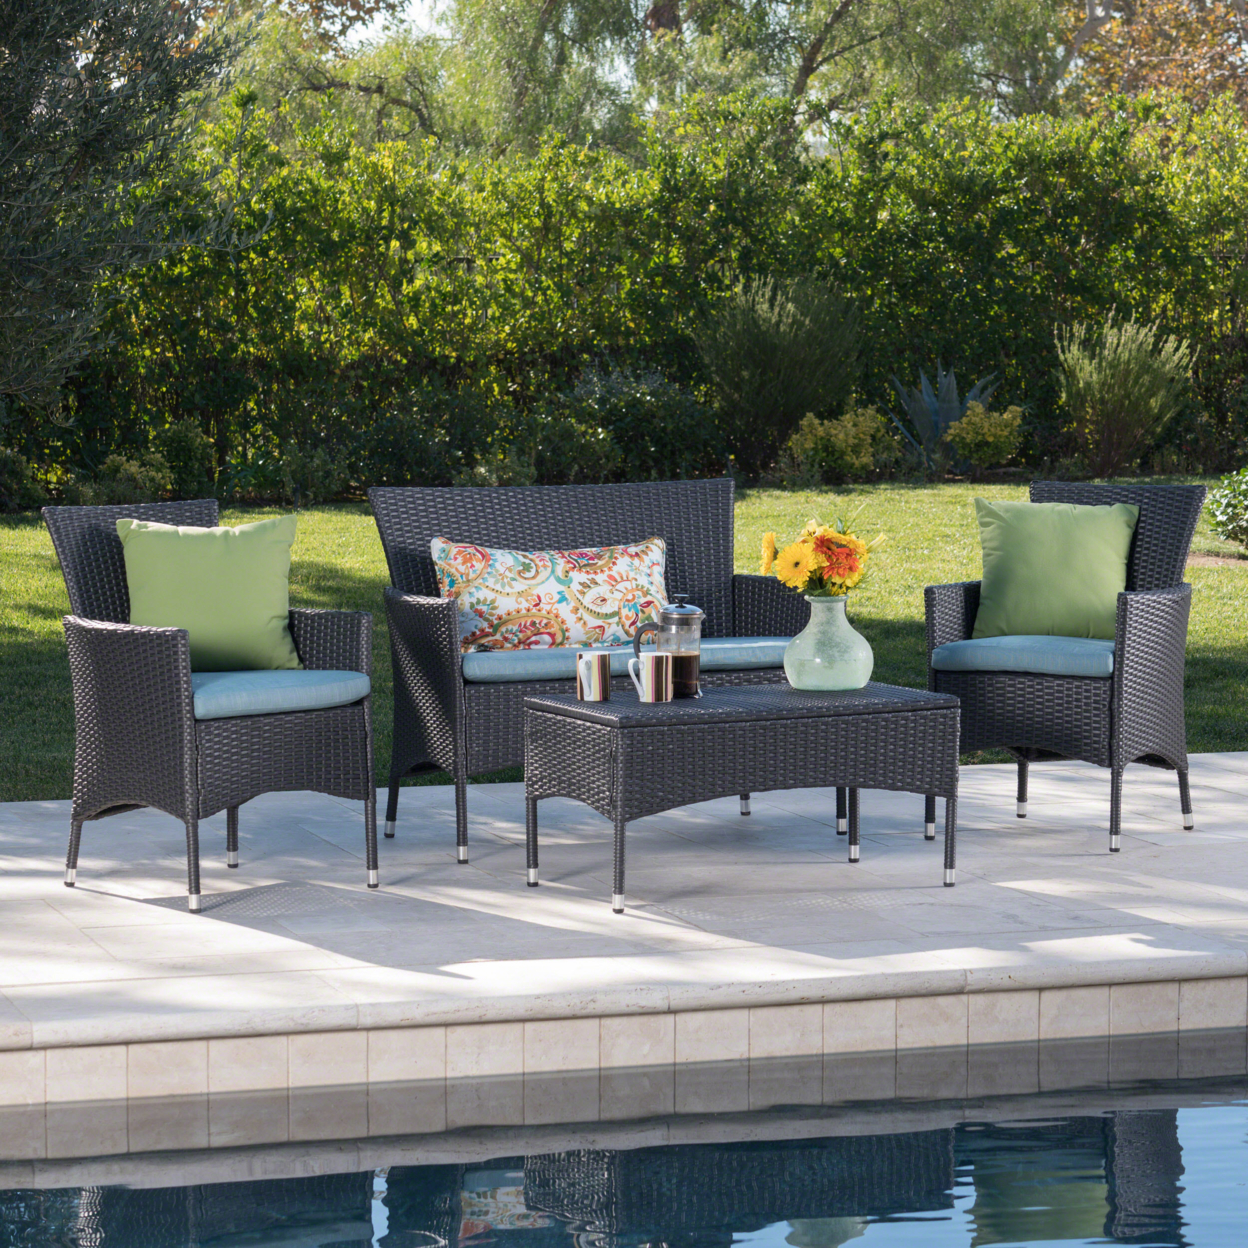 Mina Outdoor 4 Piece Wicker Chat Set With Water Resistant Cushions - Grey / Teal